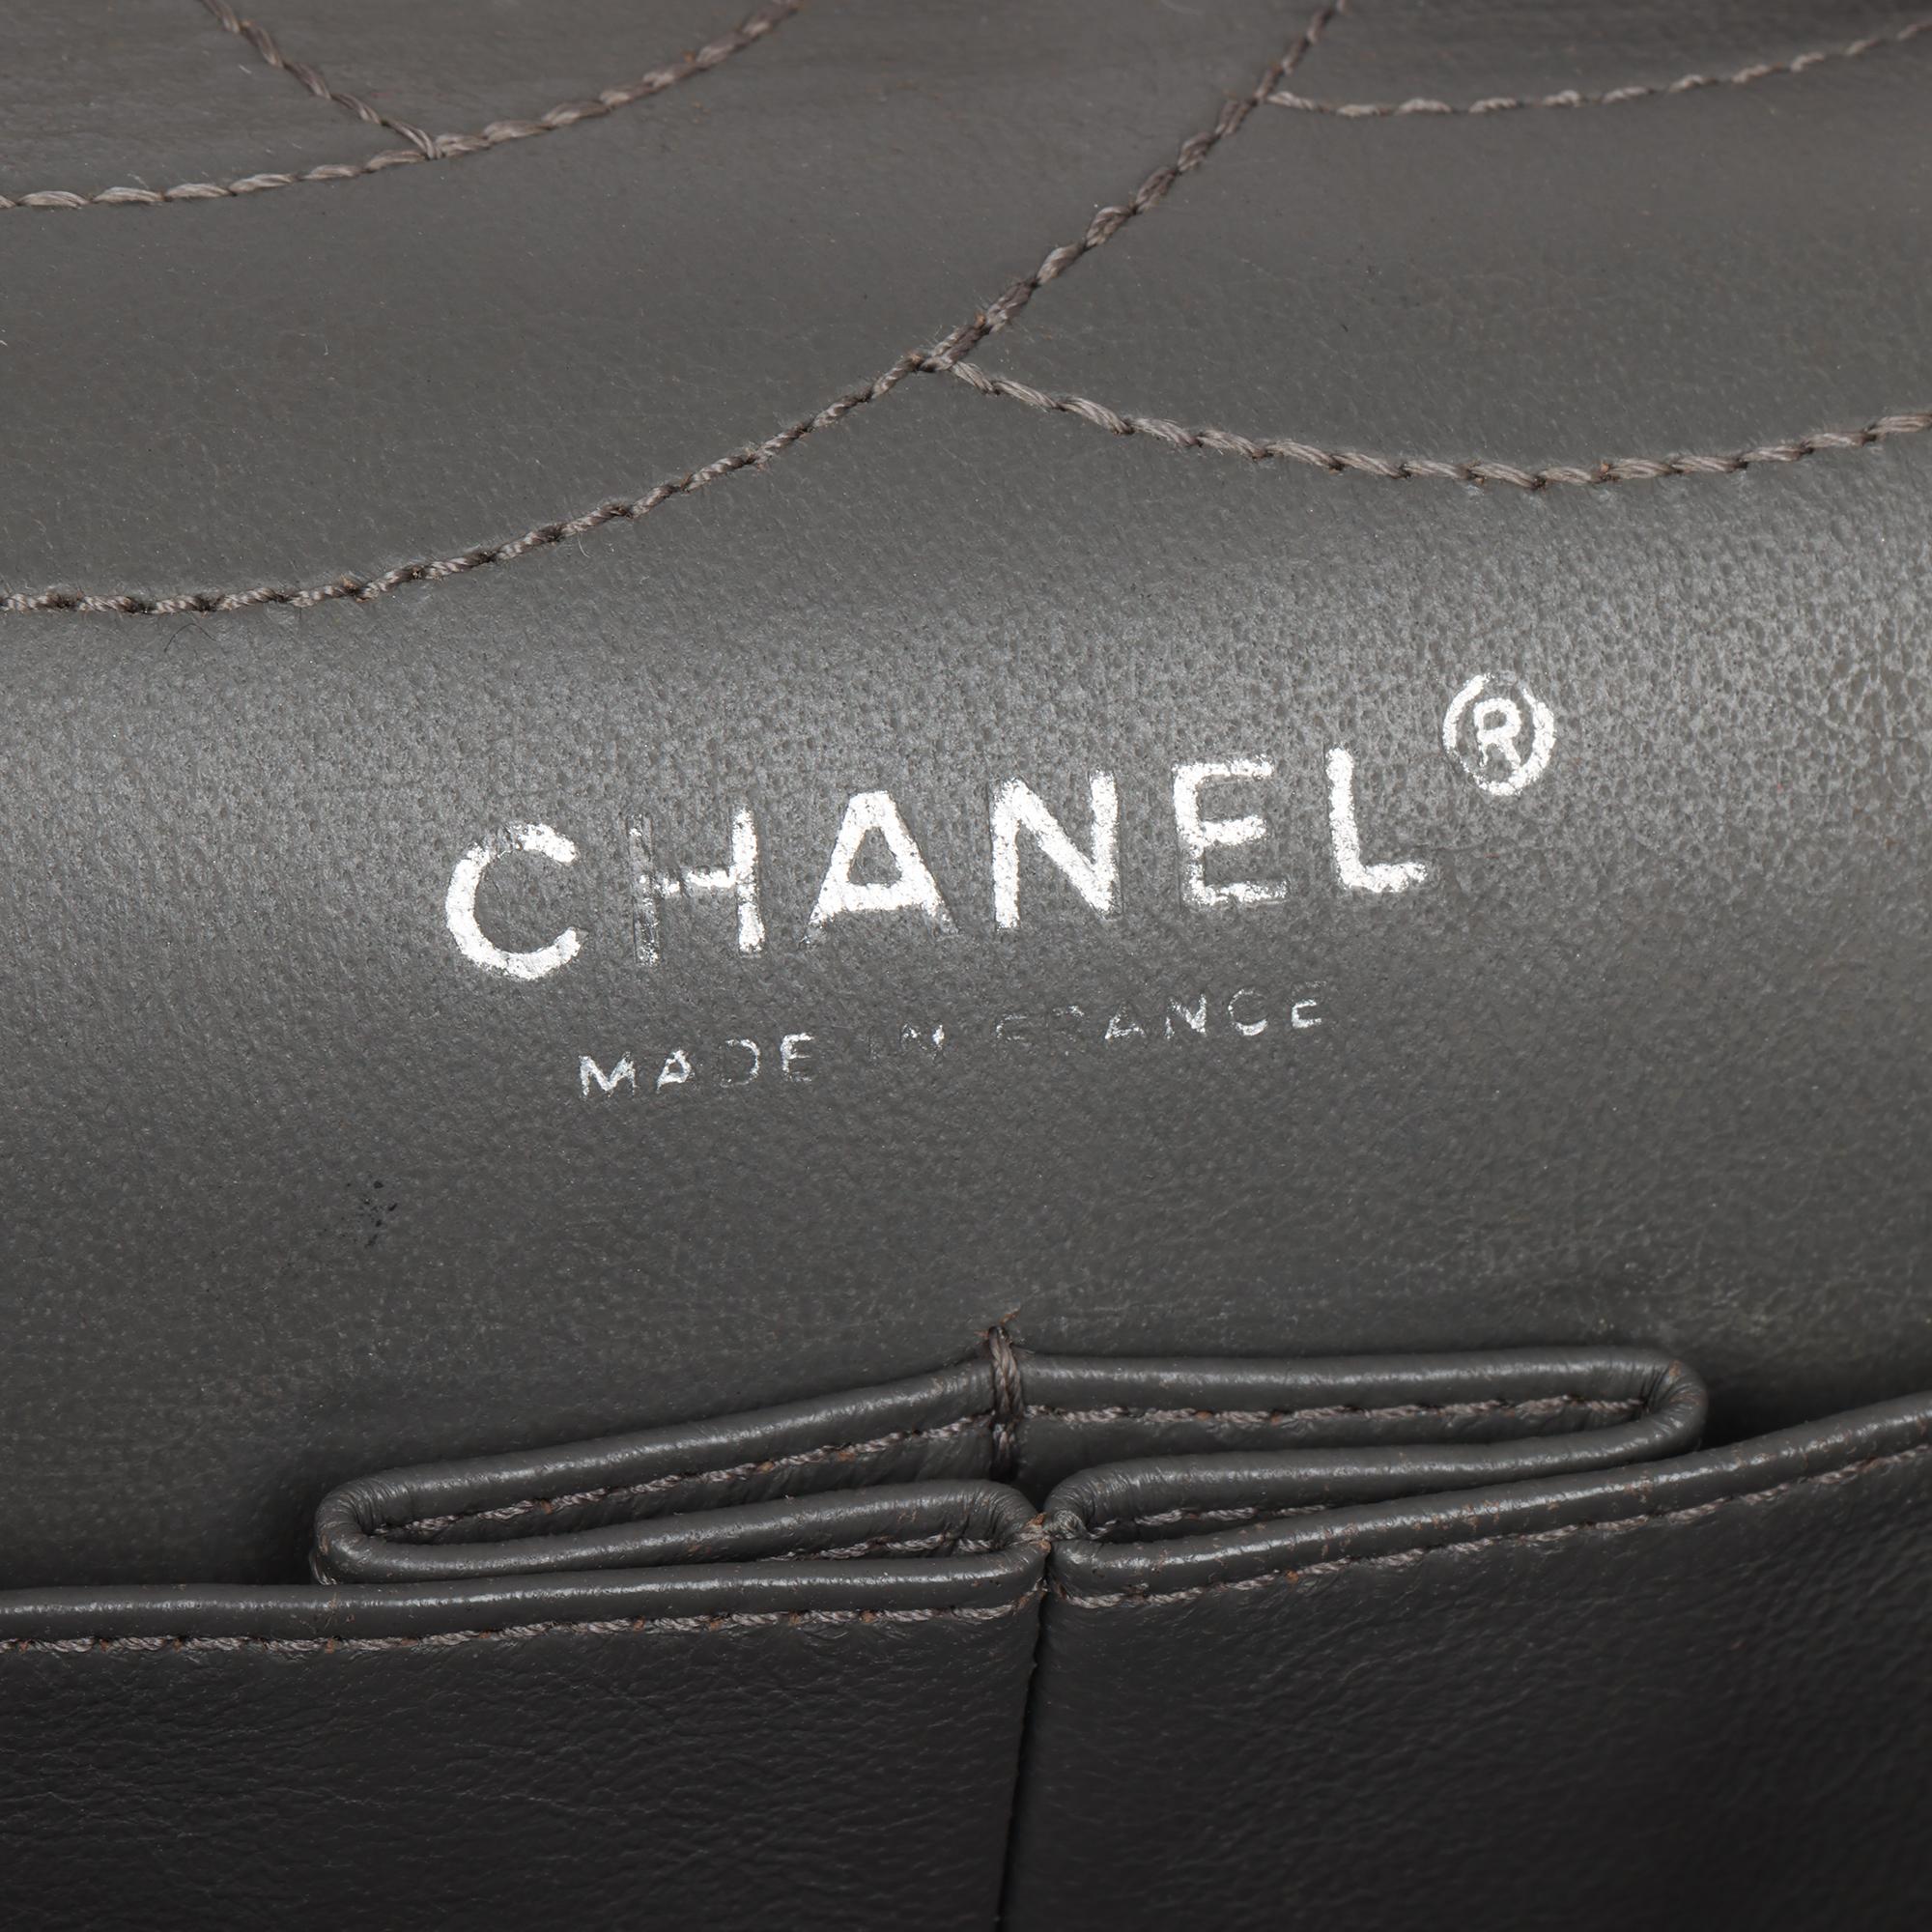 CHANEL
Grey Aged Quilted Calfskin Leather 227 2.55 Reissue Flap Bag

Xupes Reference: HB4007
Serial Number: 12322647
Age (Circa): 2012
Accompanied By: Chanel Dust Bag, Box, Protective Felt, Authenticity Card
Authenticity Details: Authenticity Card,